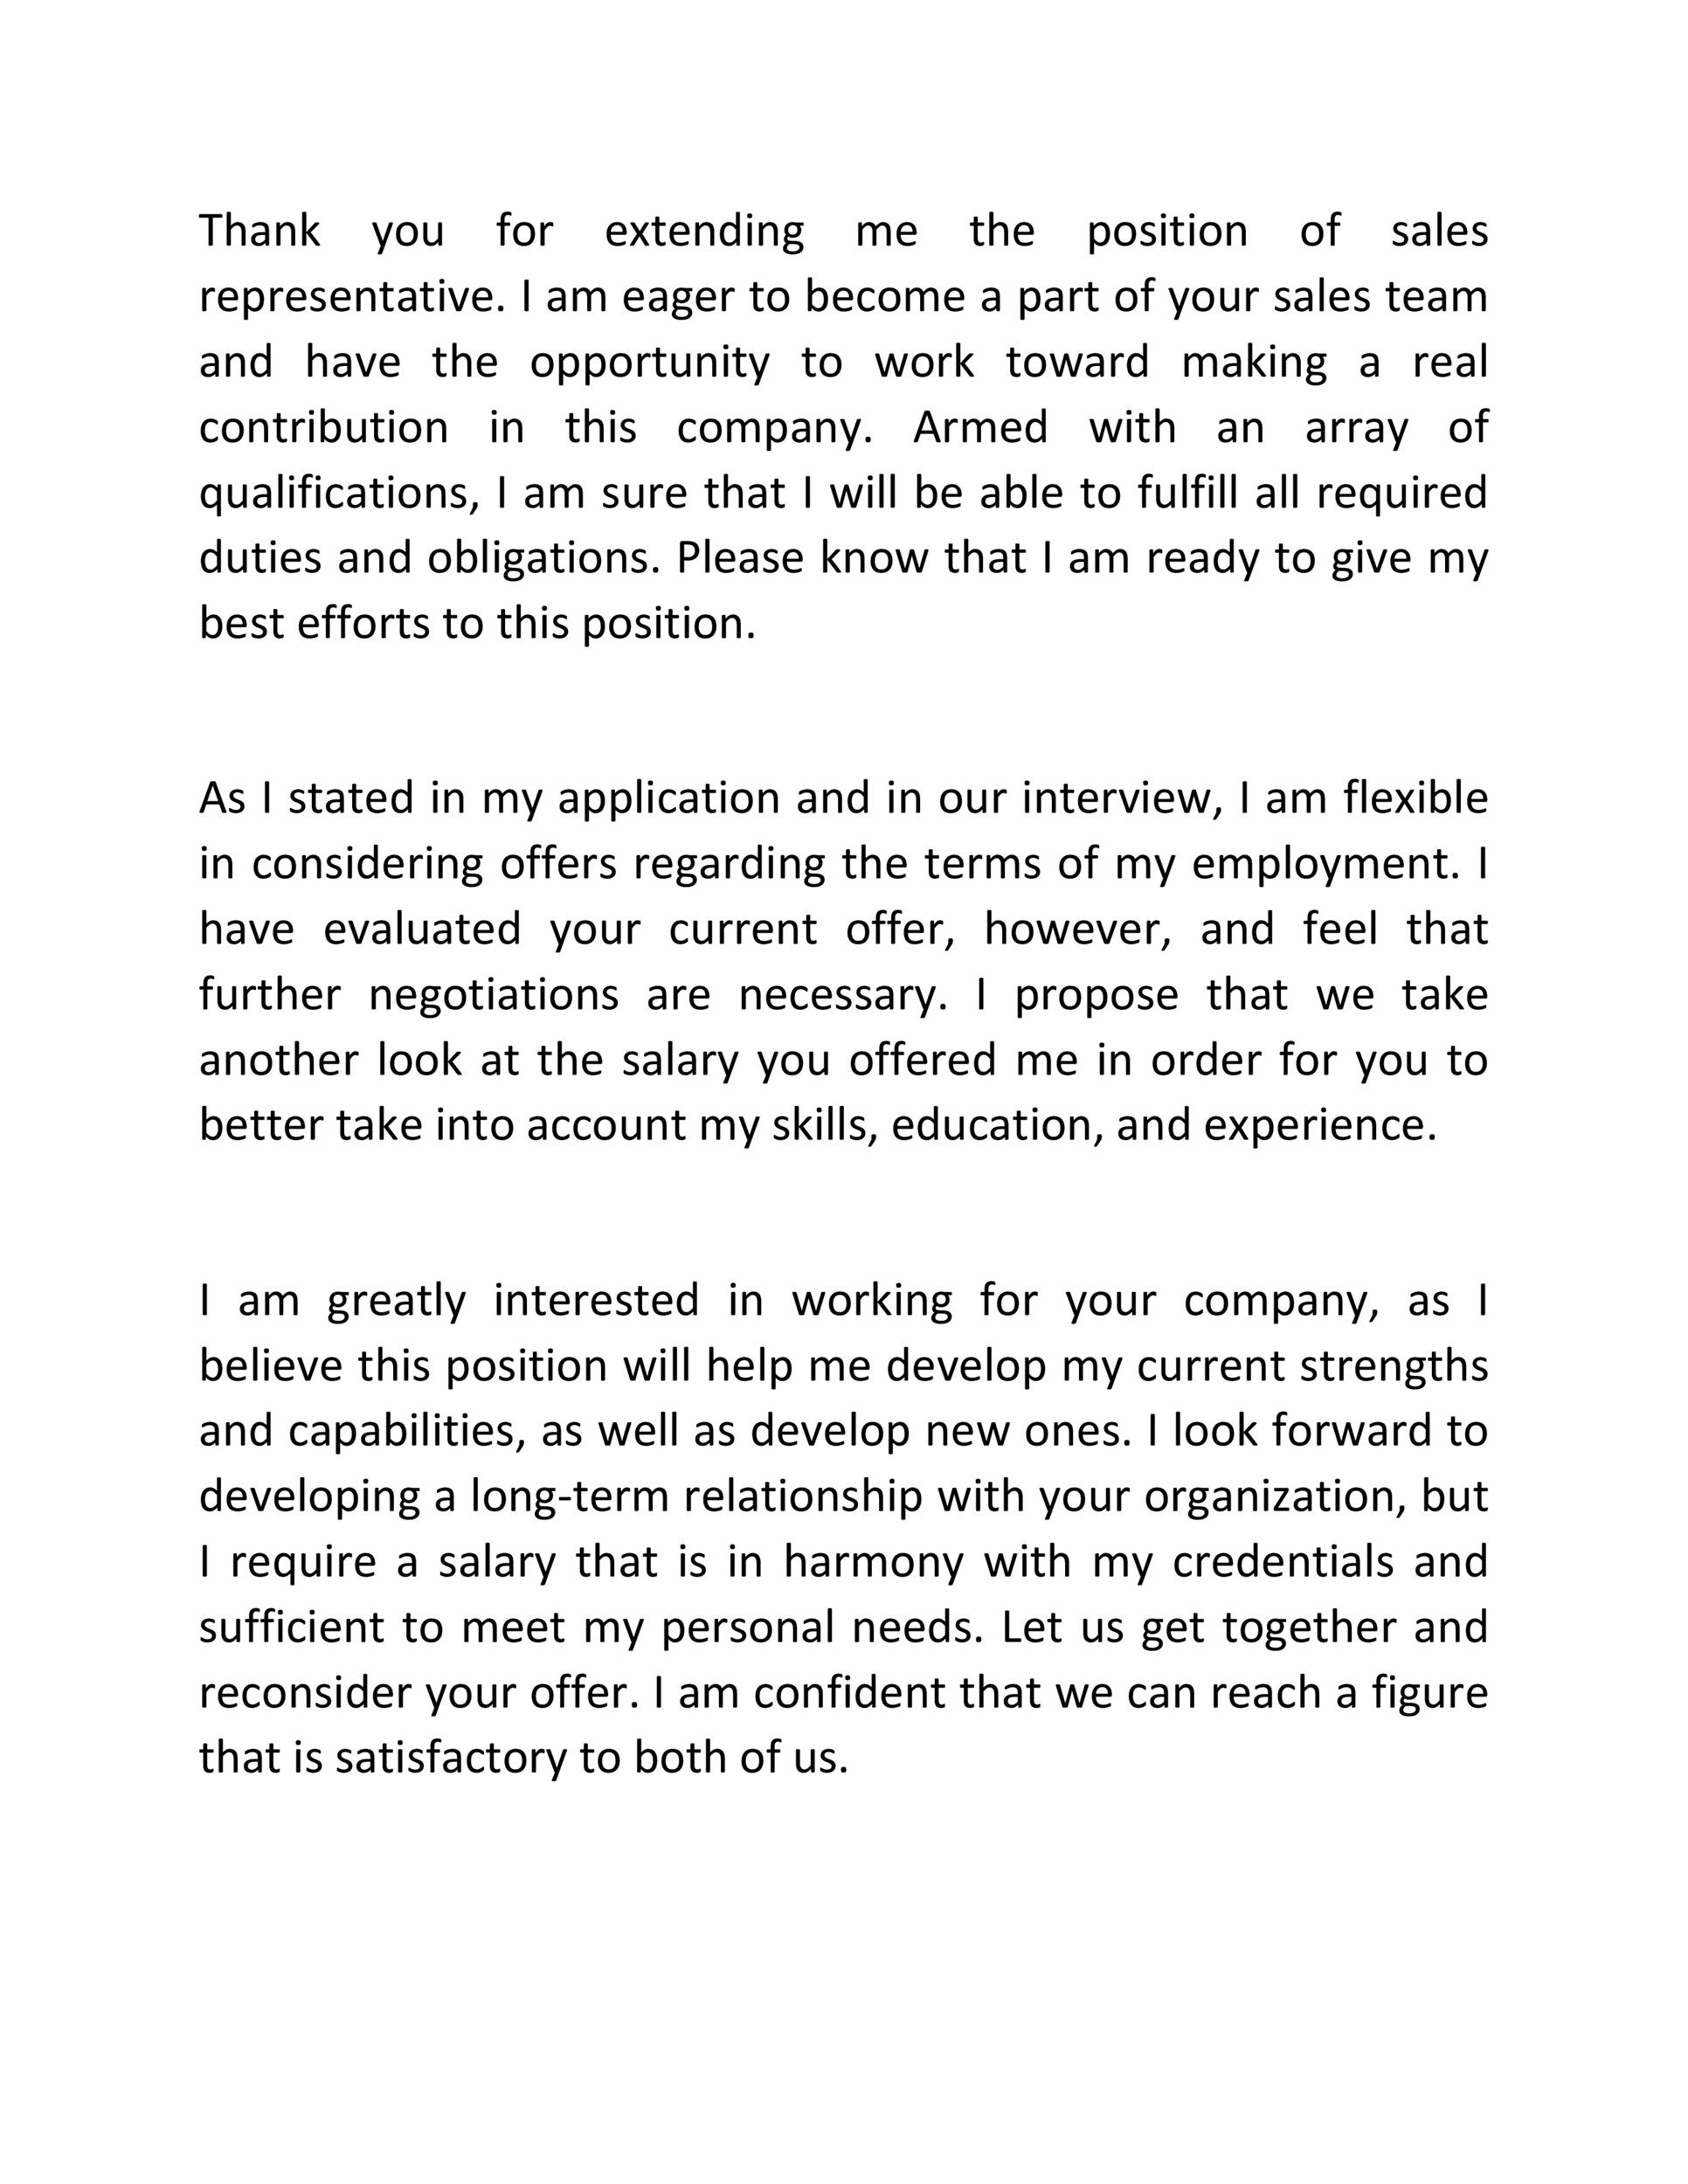 Free salary negotiation letter 42